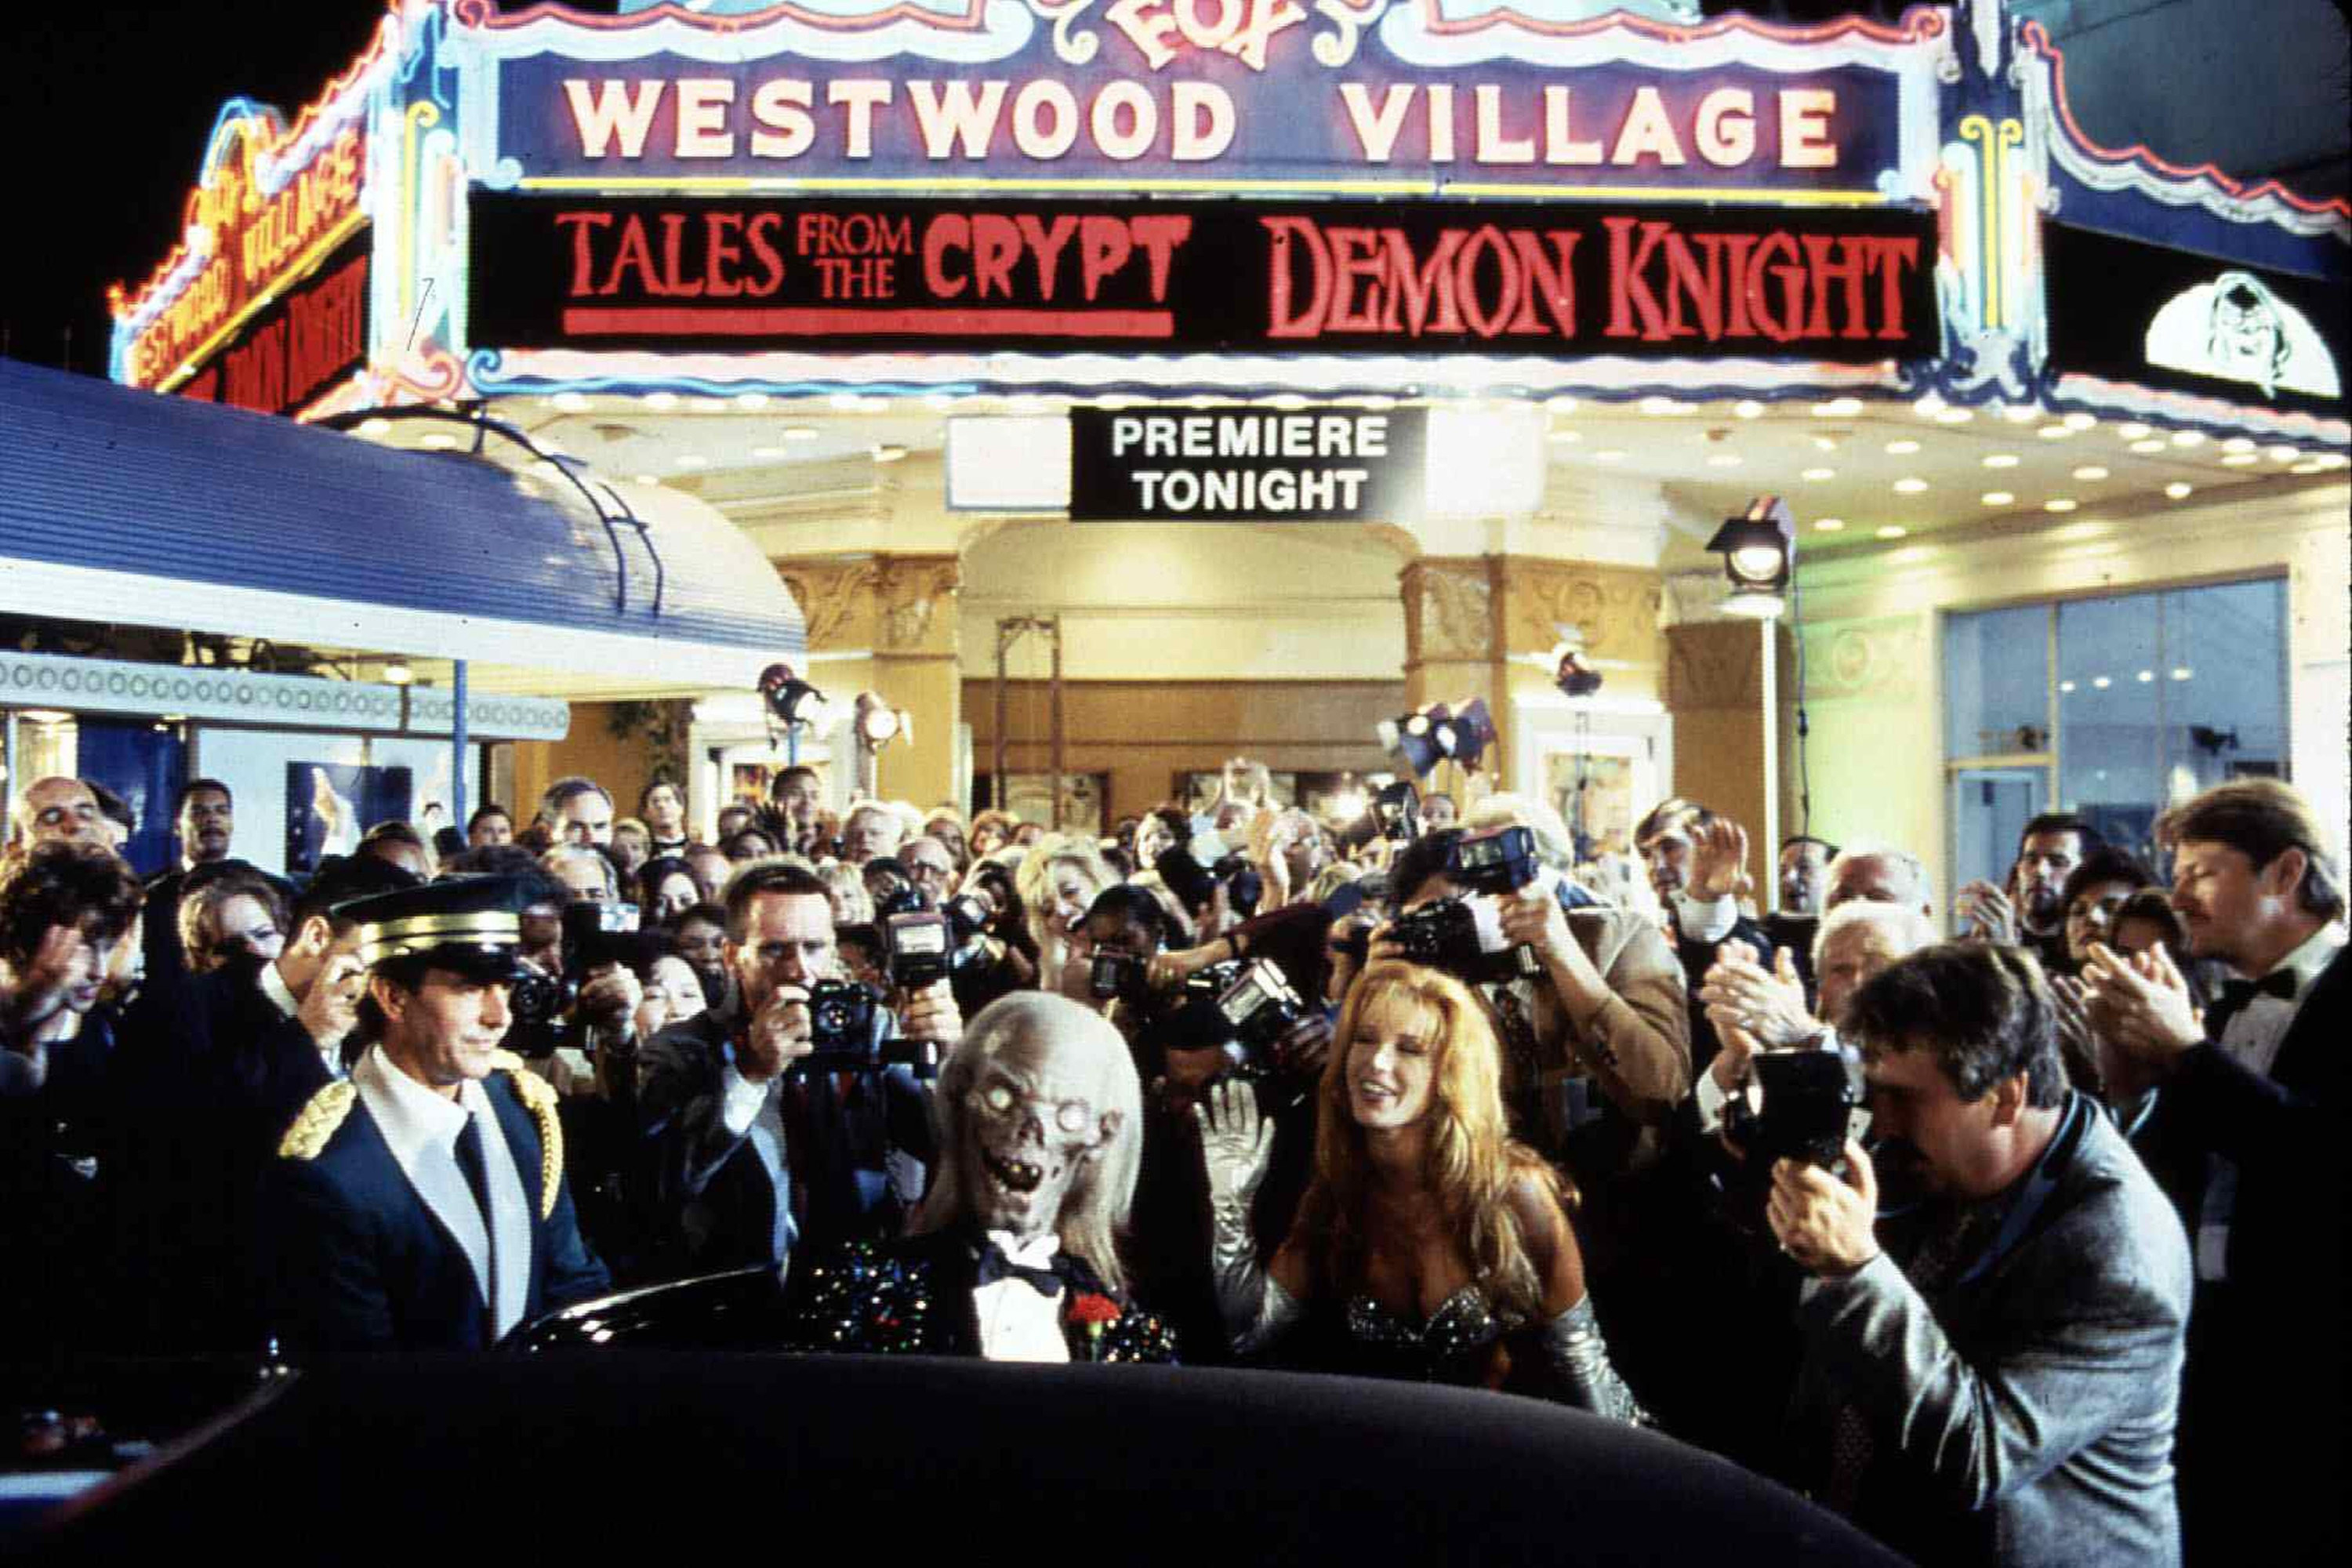 The Cryptkeeper arrives at the premiere of the debut &quot;Tales from the Crypt&quot; film in its meta opening sequence